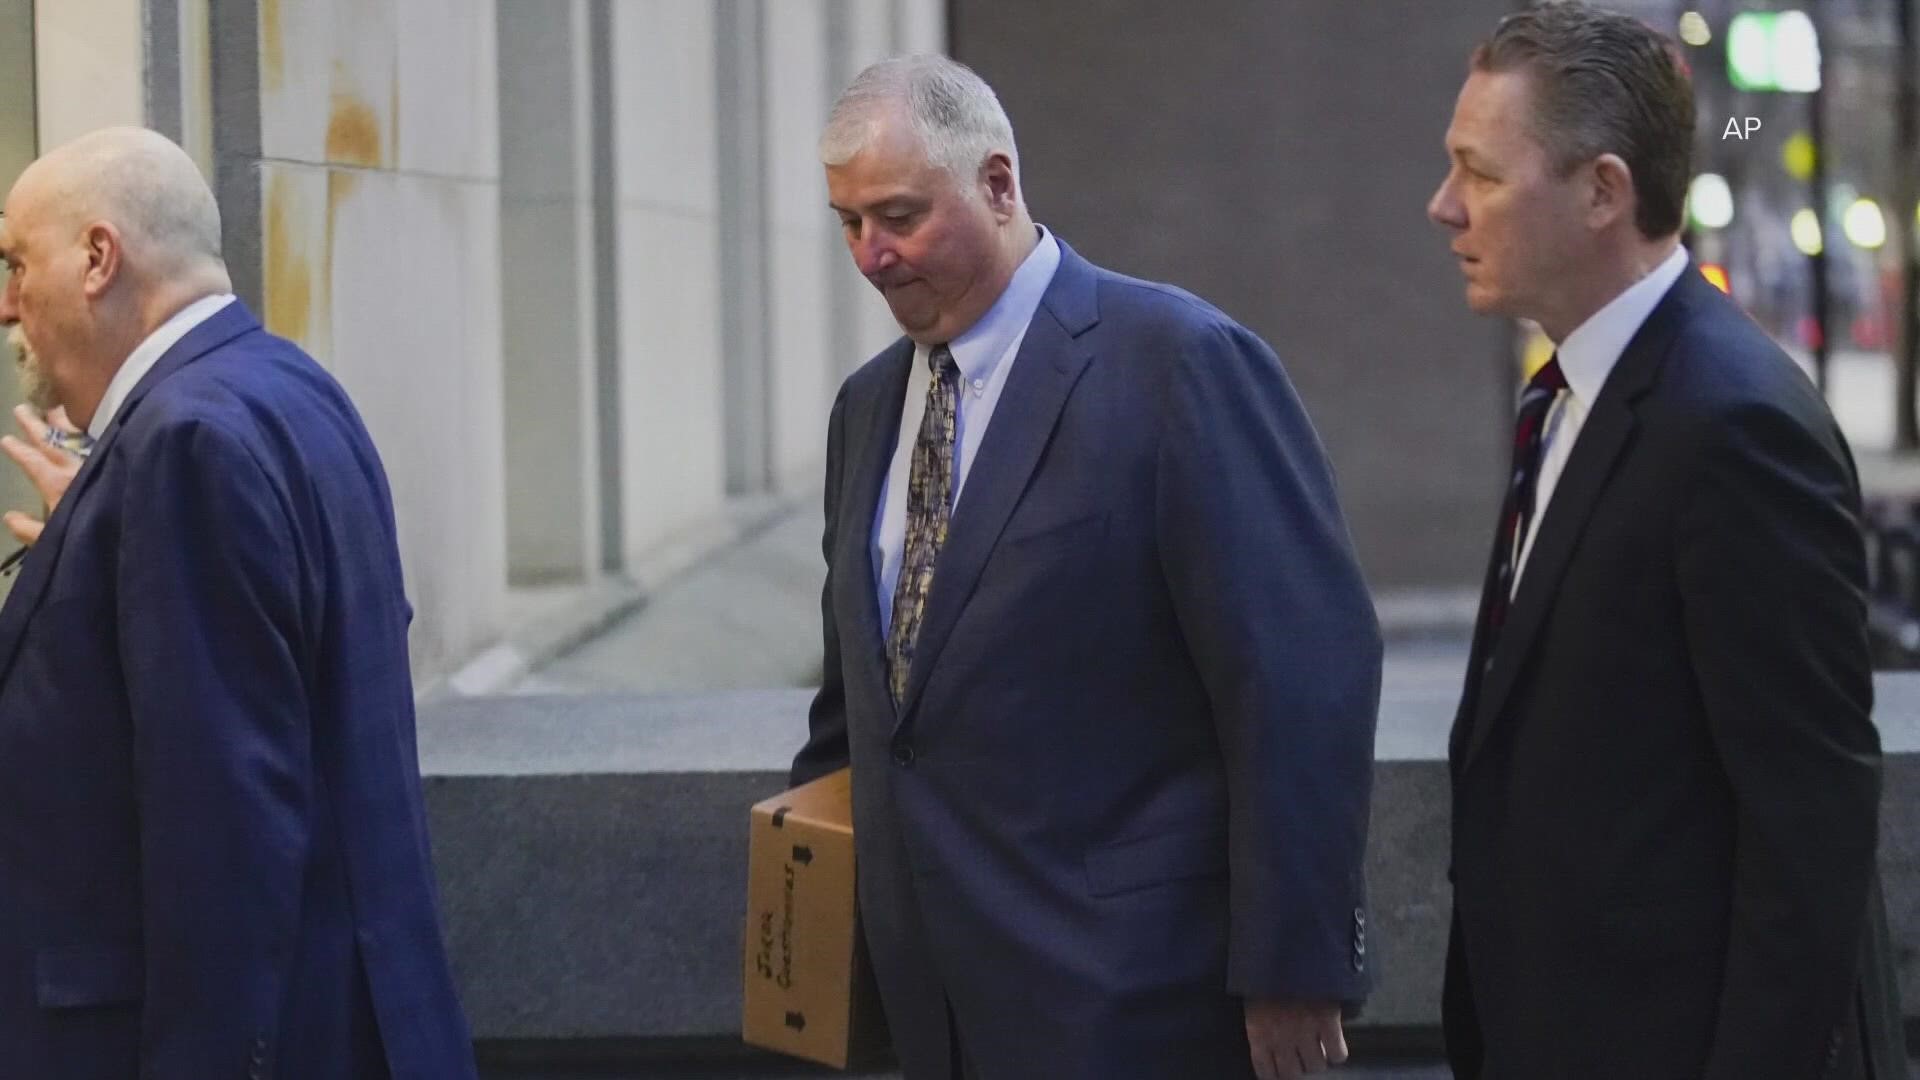 Jurors must decide whether former Ohio House Speaker Larry Householder and former Ohio Republican Party chair Matt Borges are guilty of racketeering.